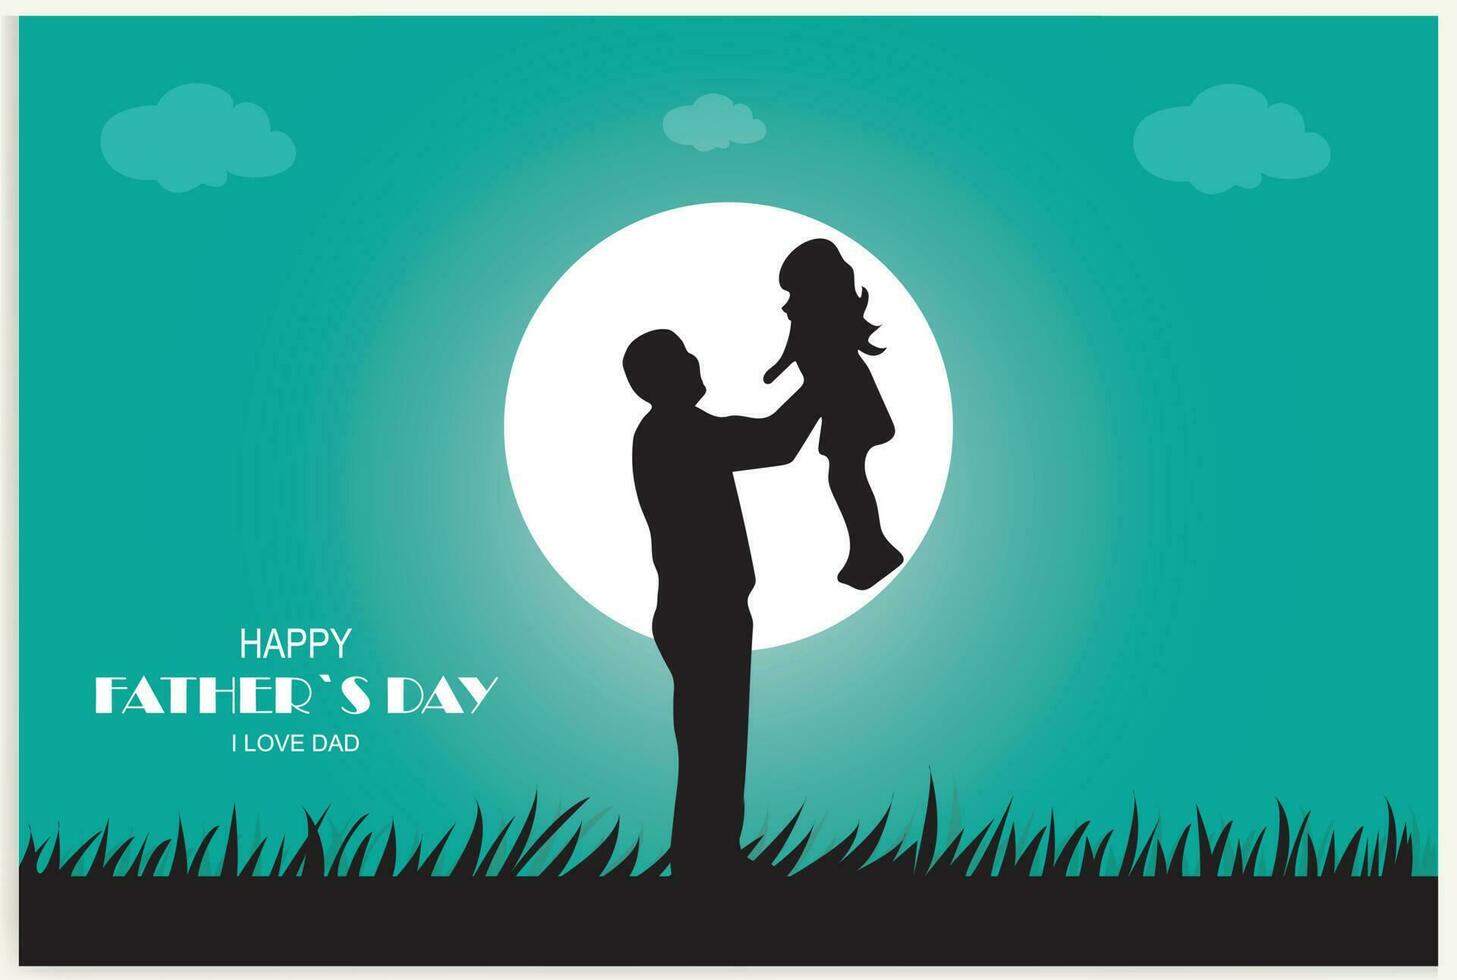 Happy Father's Day and a silhouette of father and children in the background with sun and sky. vector